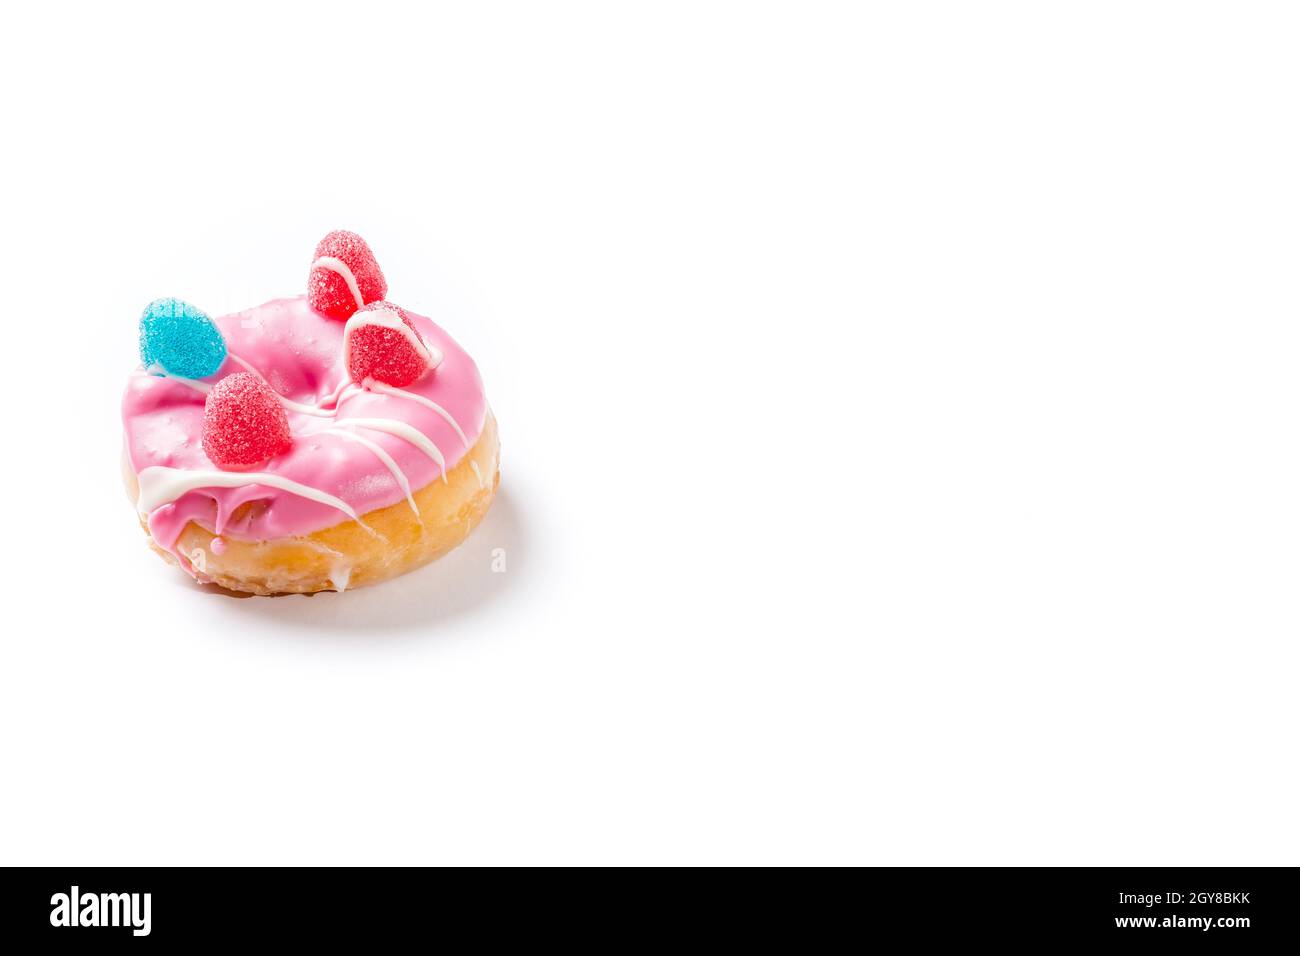 Photograph of a pink donuts painted with white chocolate and decorated with jelly beans.The photo is taken in horizontal format on a white background Stock Photo